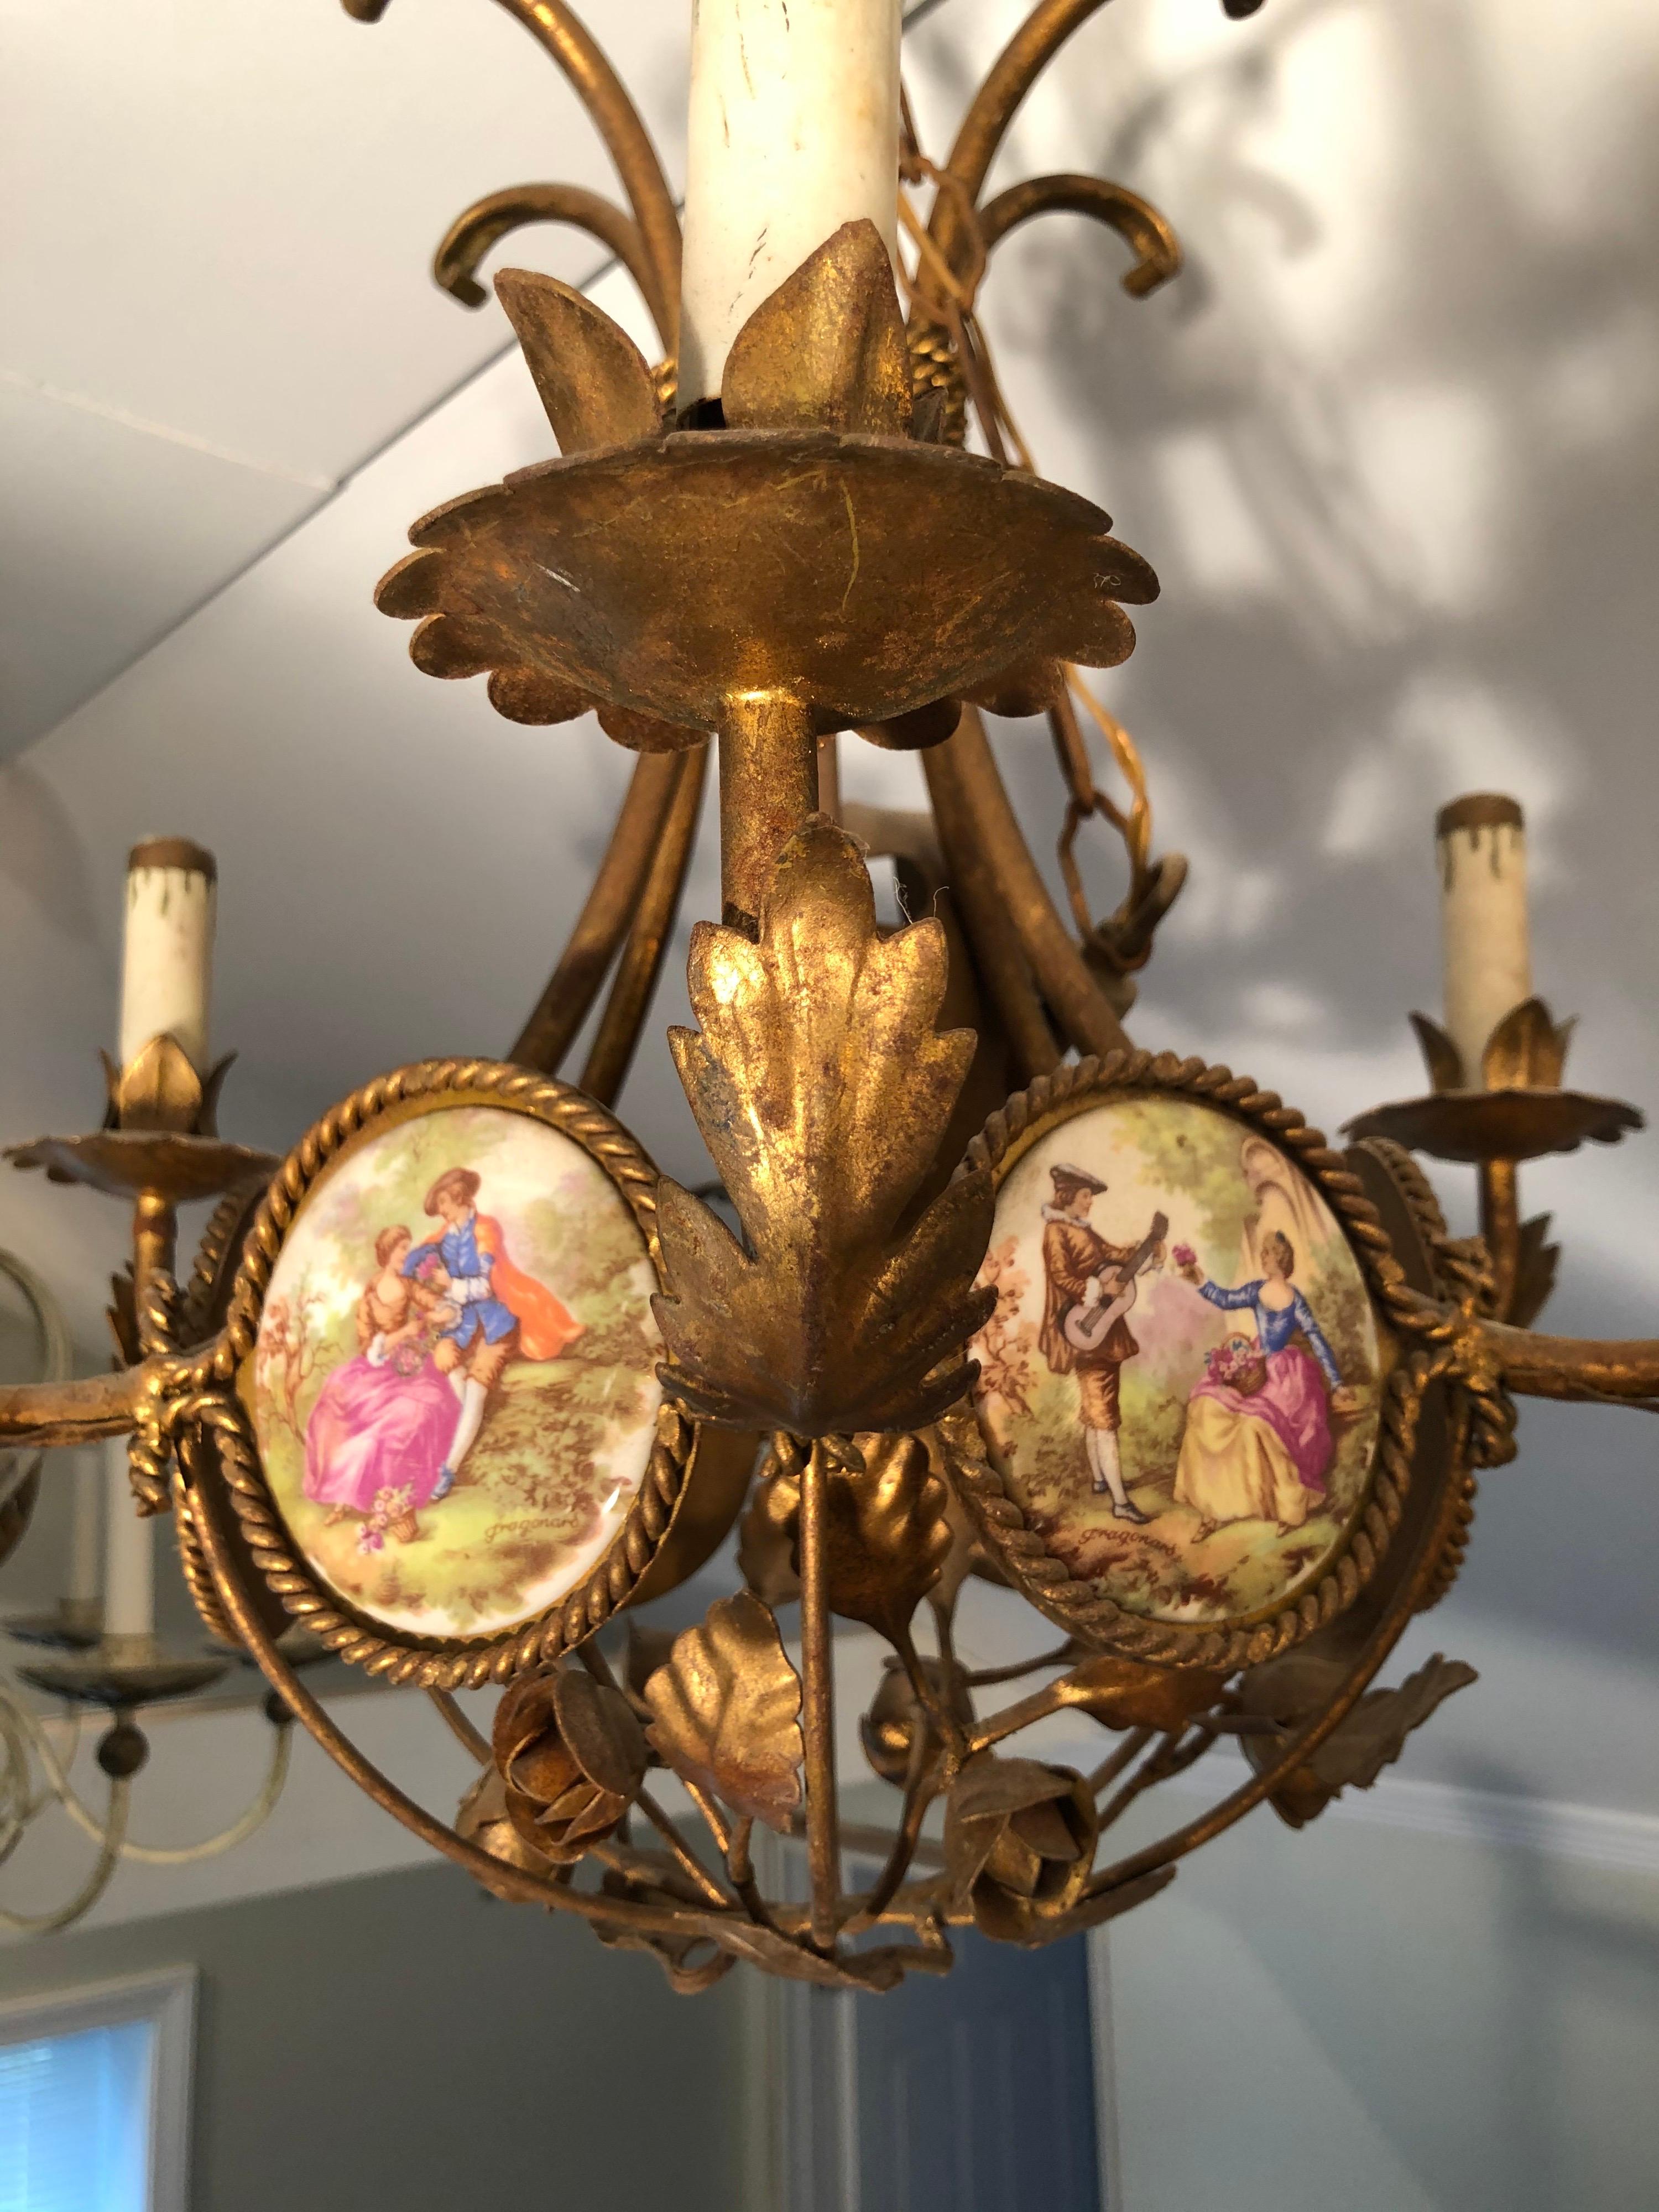 Mid-20th Century French Gilt Iron Chandelier with Porcelain Genre Scene Panels